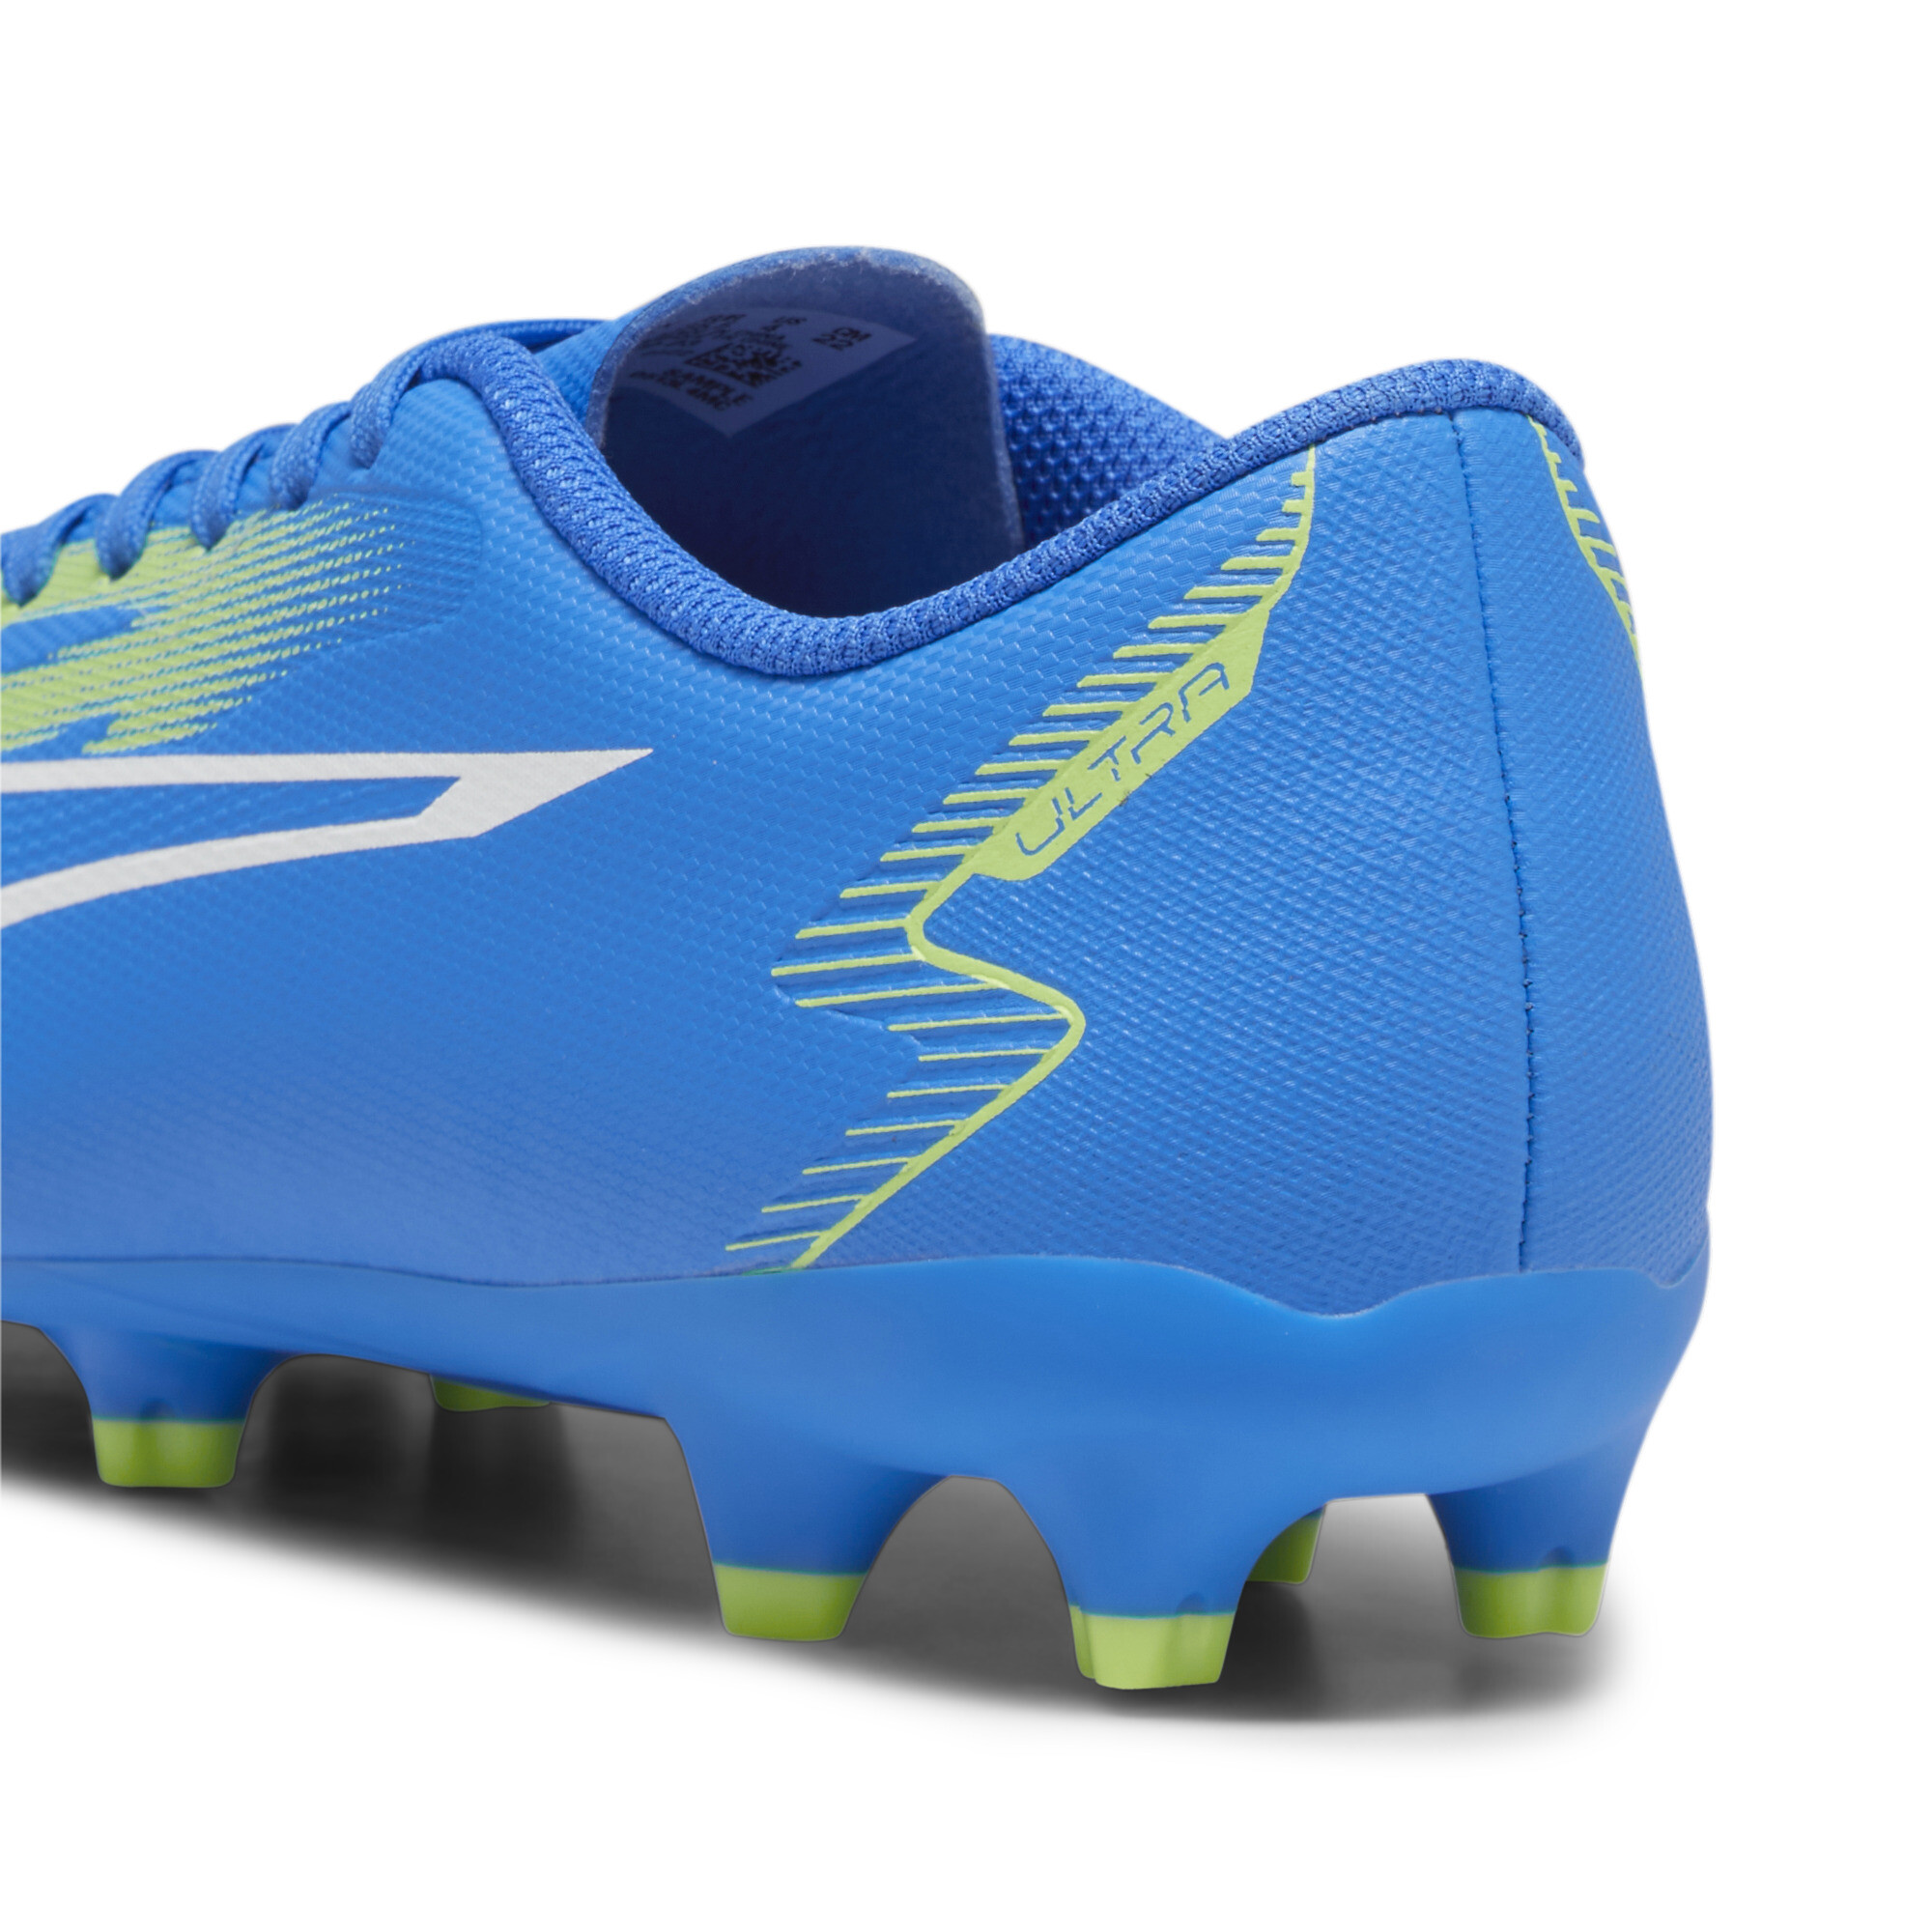 PUMA ULTRA PLAY FG/AG Youth Football Boots In Blue, Size EU 28